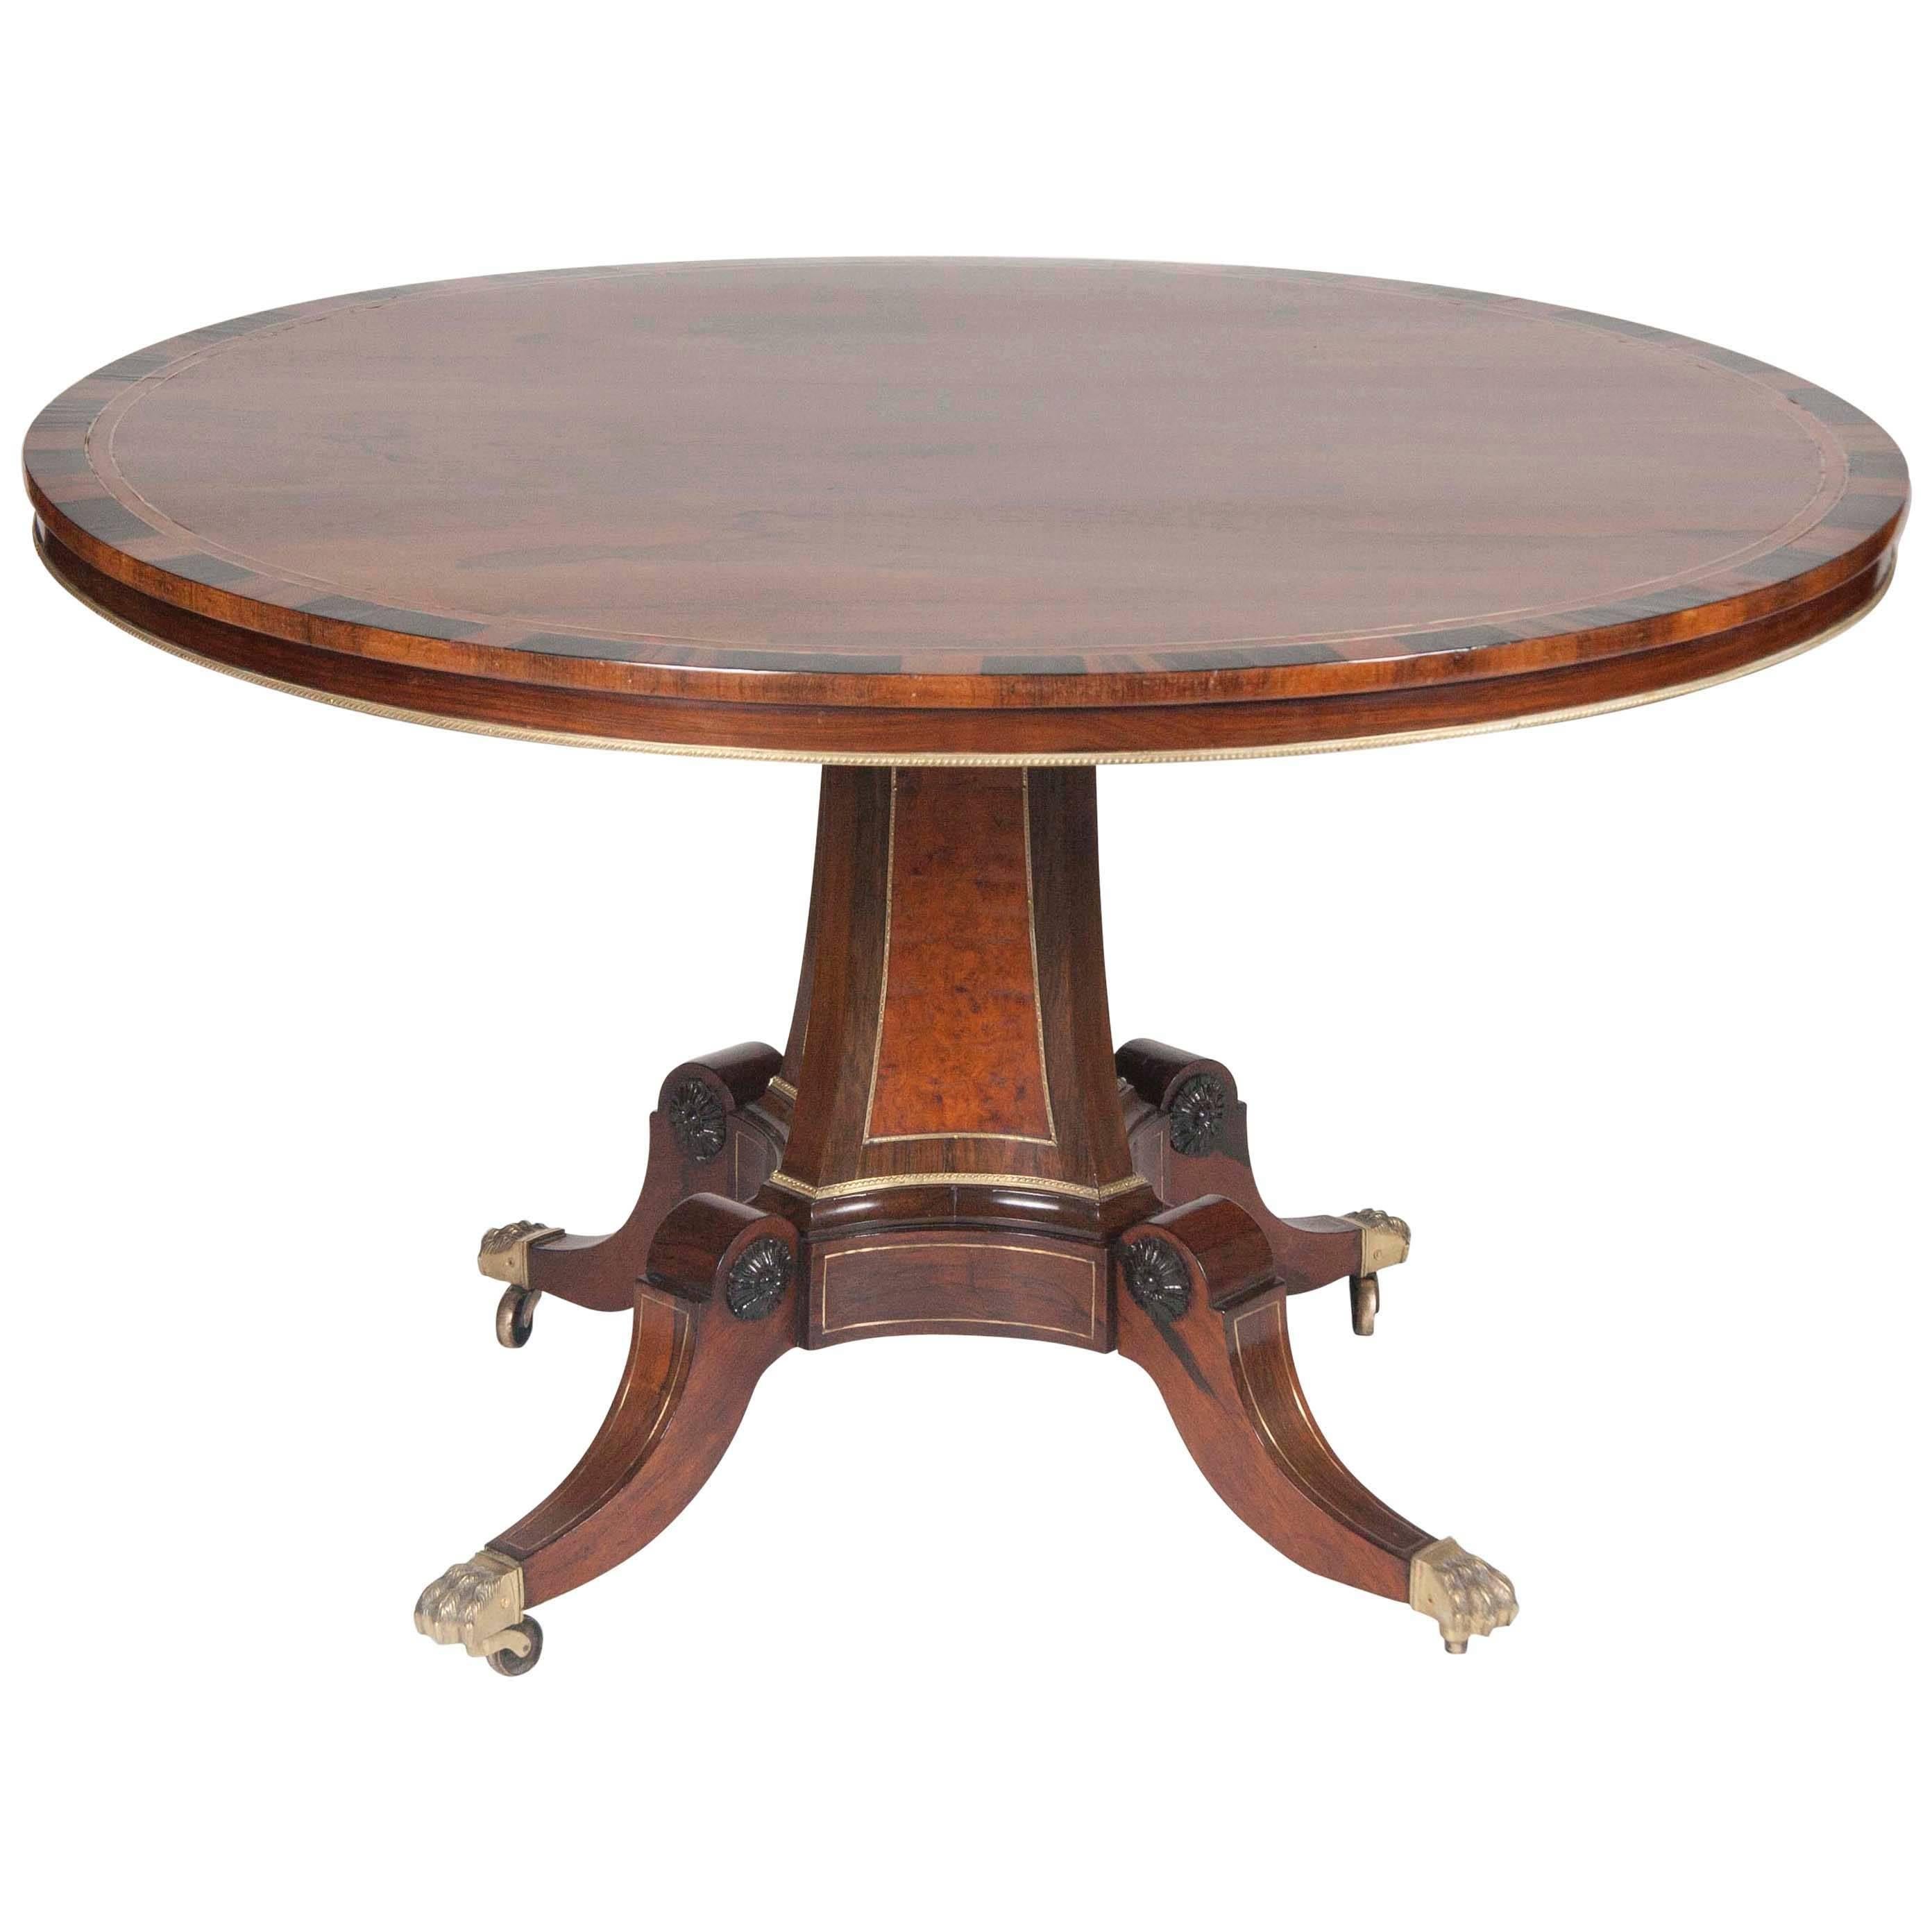 A Rosewood, Burwood and Calamander Centre Table In The Manner of George Oakley